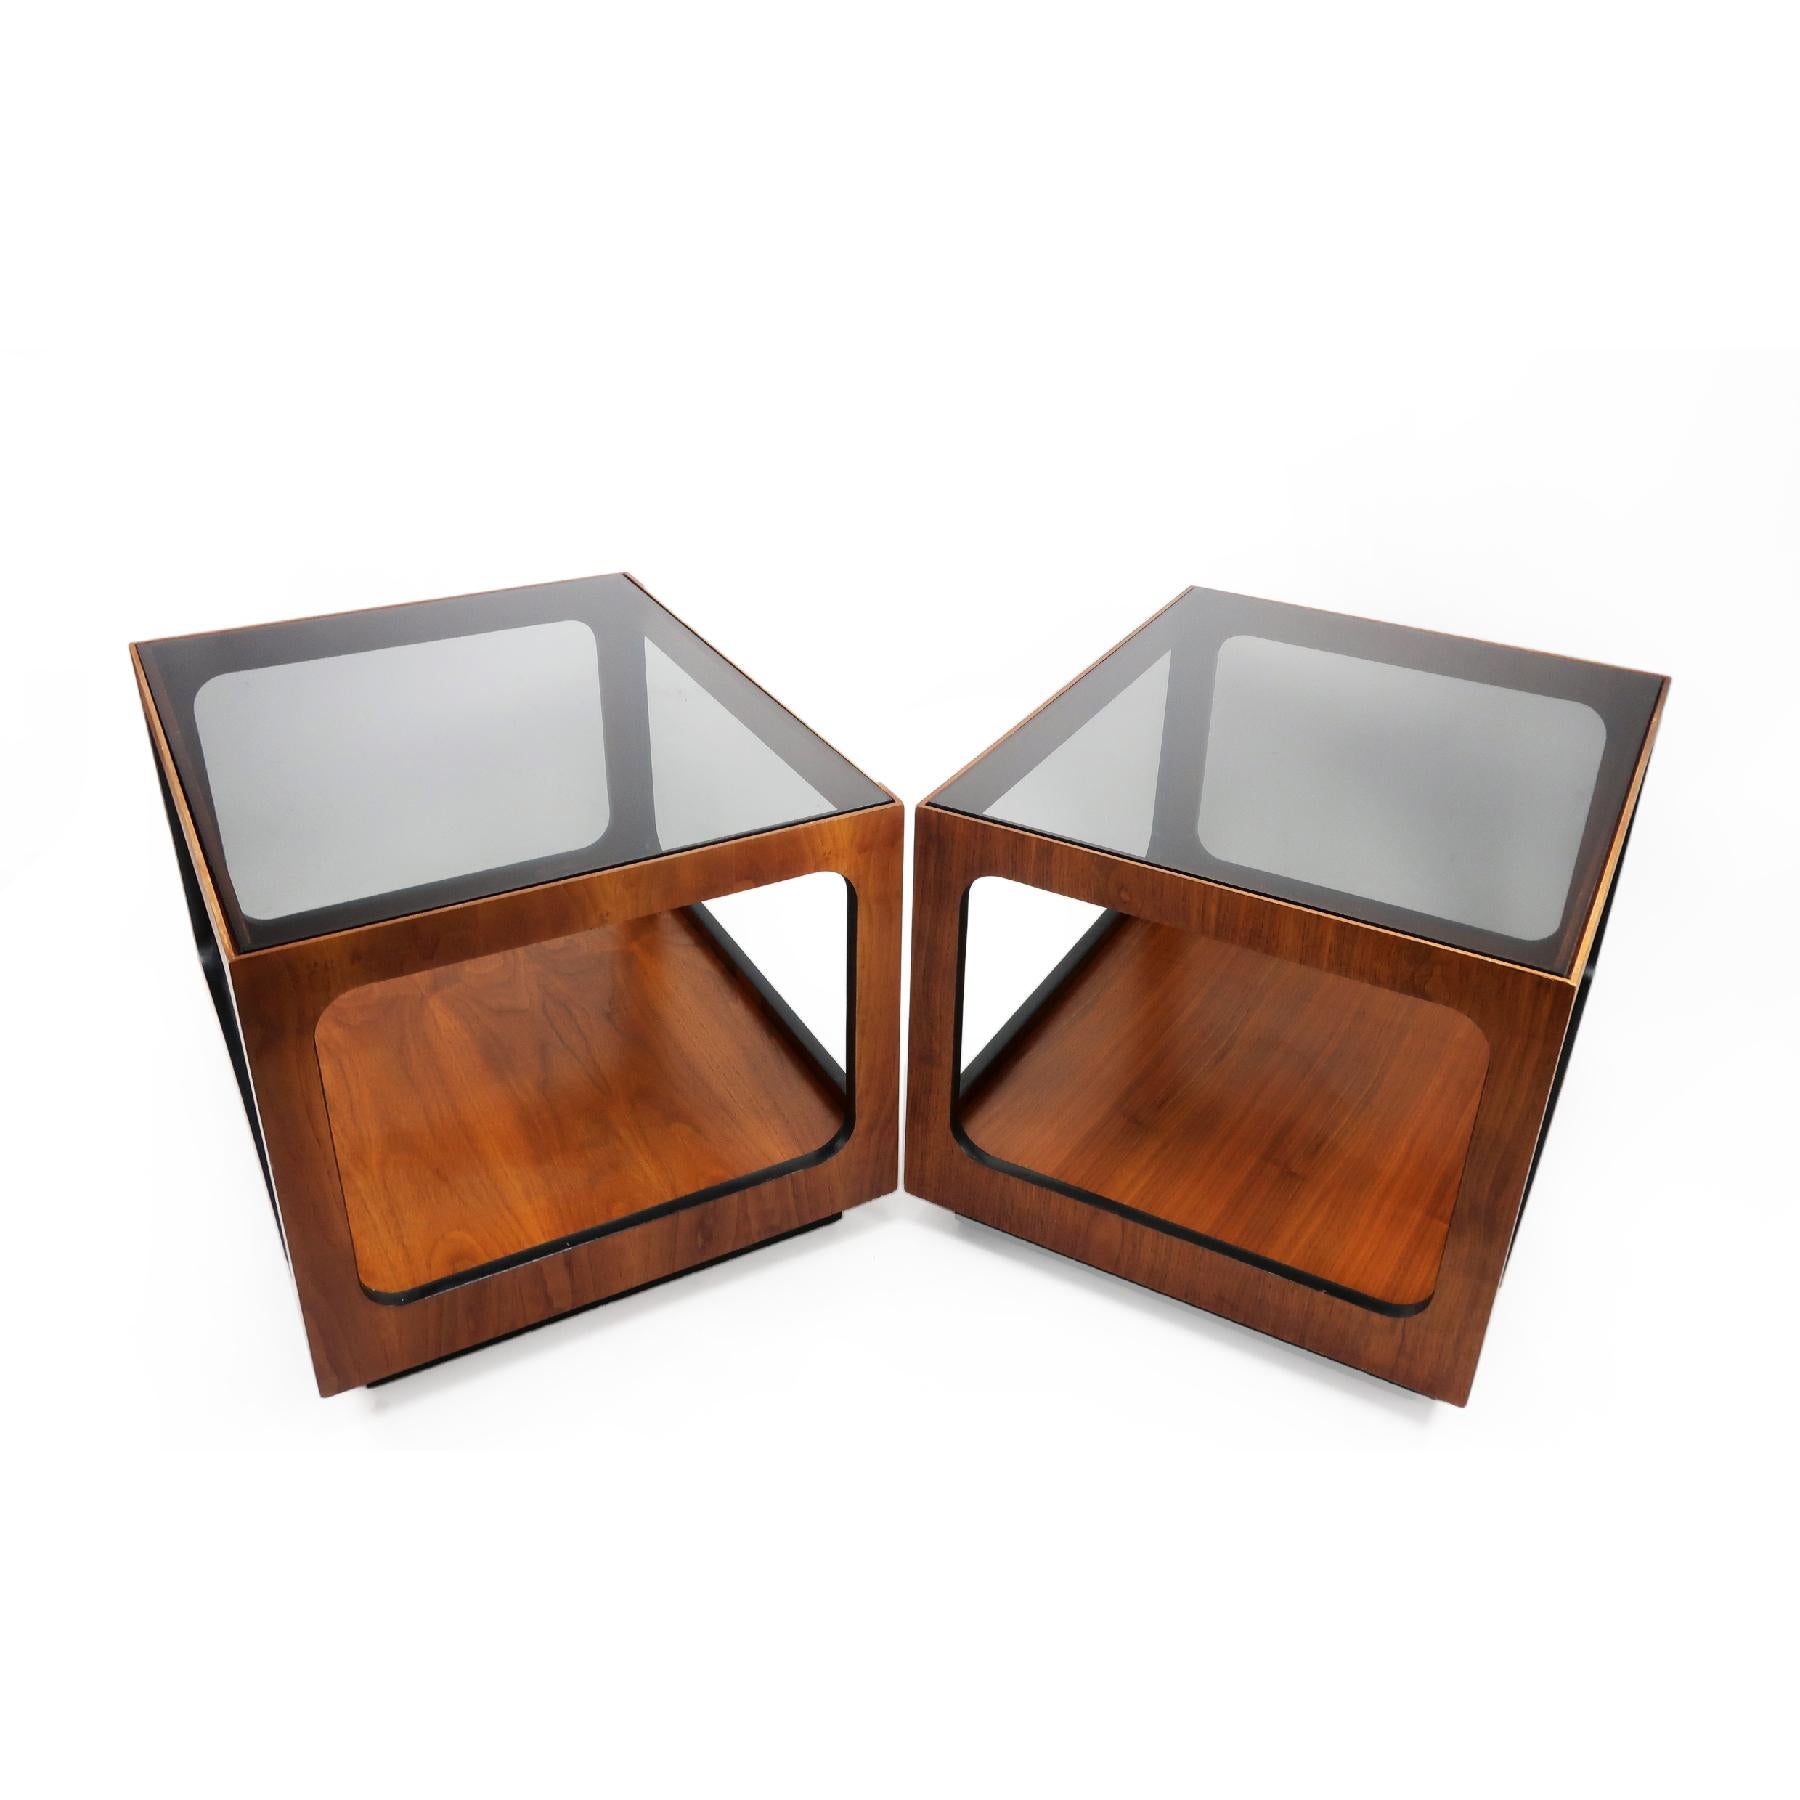 20th Century Pair of Lane Walnut and Smoked Glass Side Tables